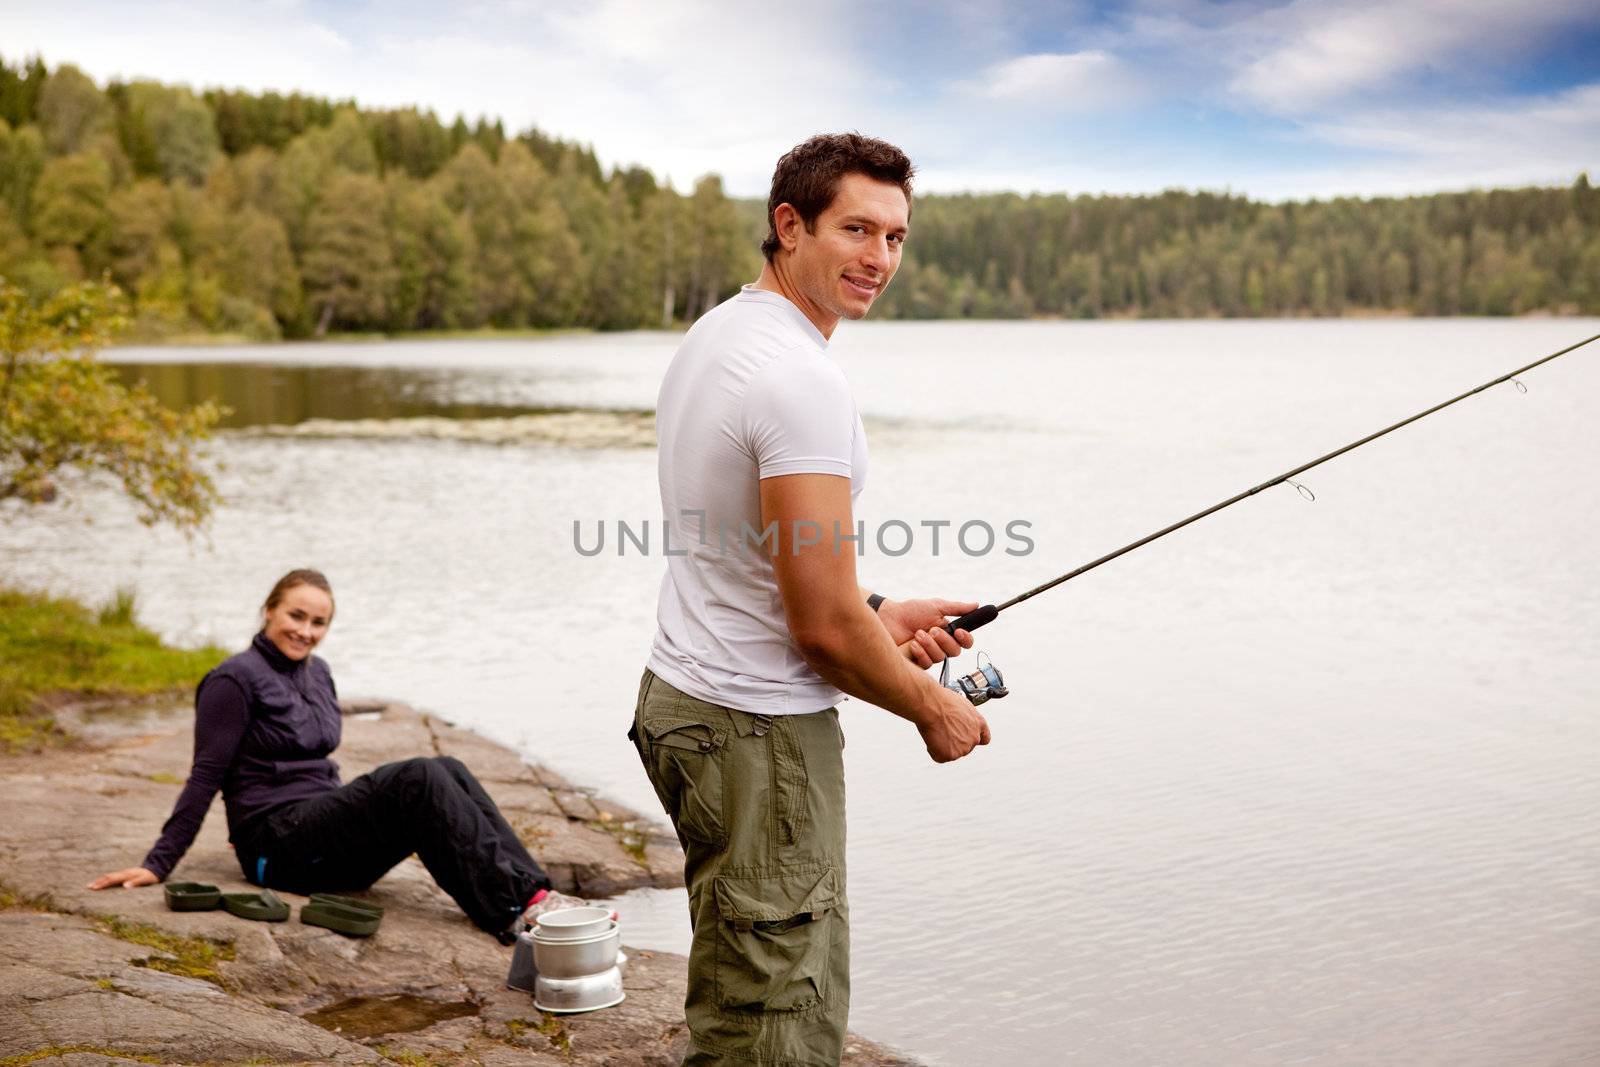 A man fishing on a lake with camping equipment and woman in background